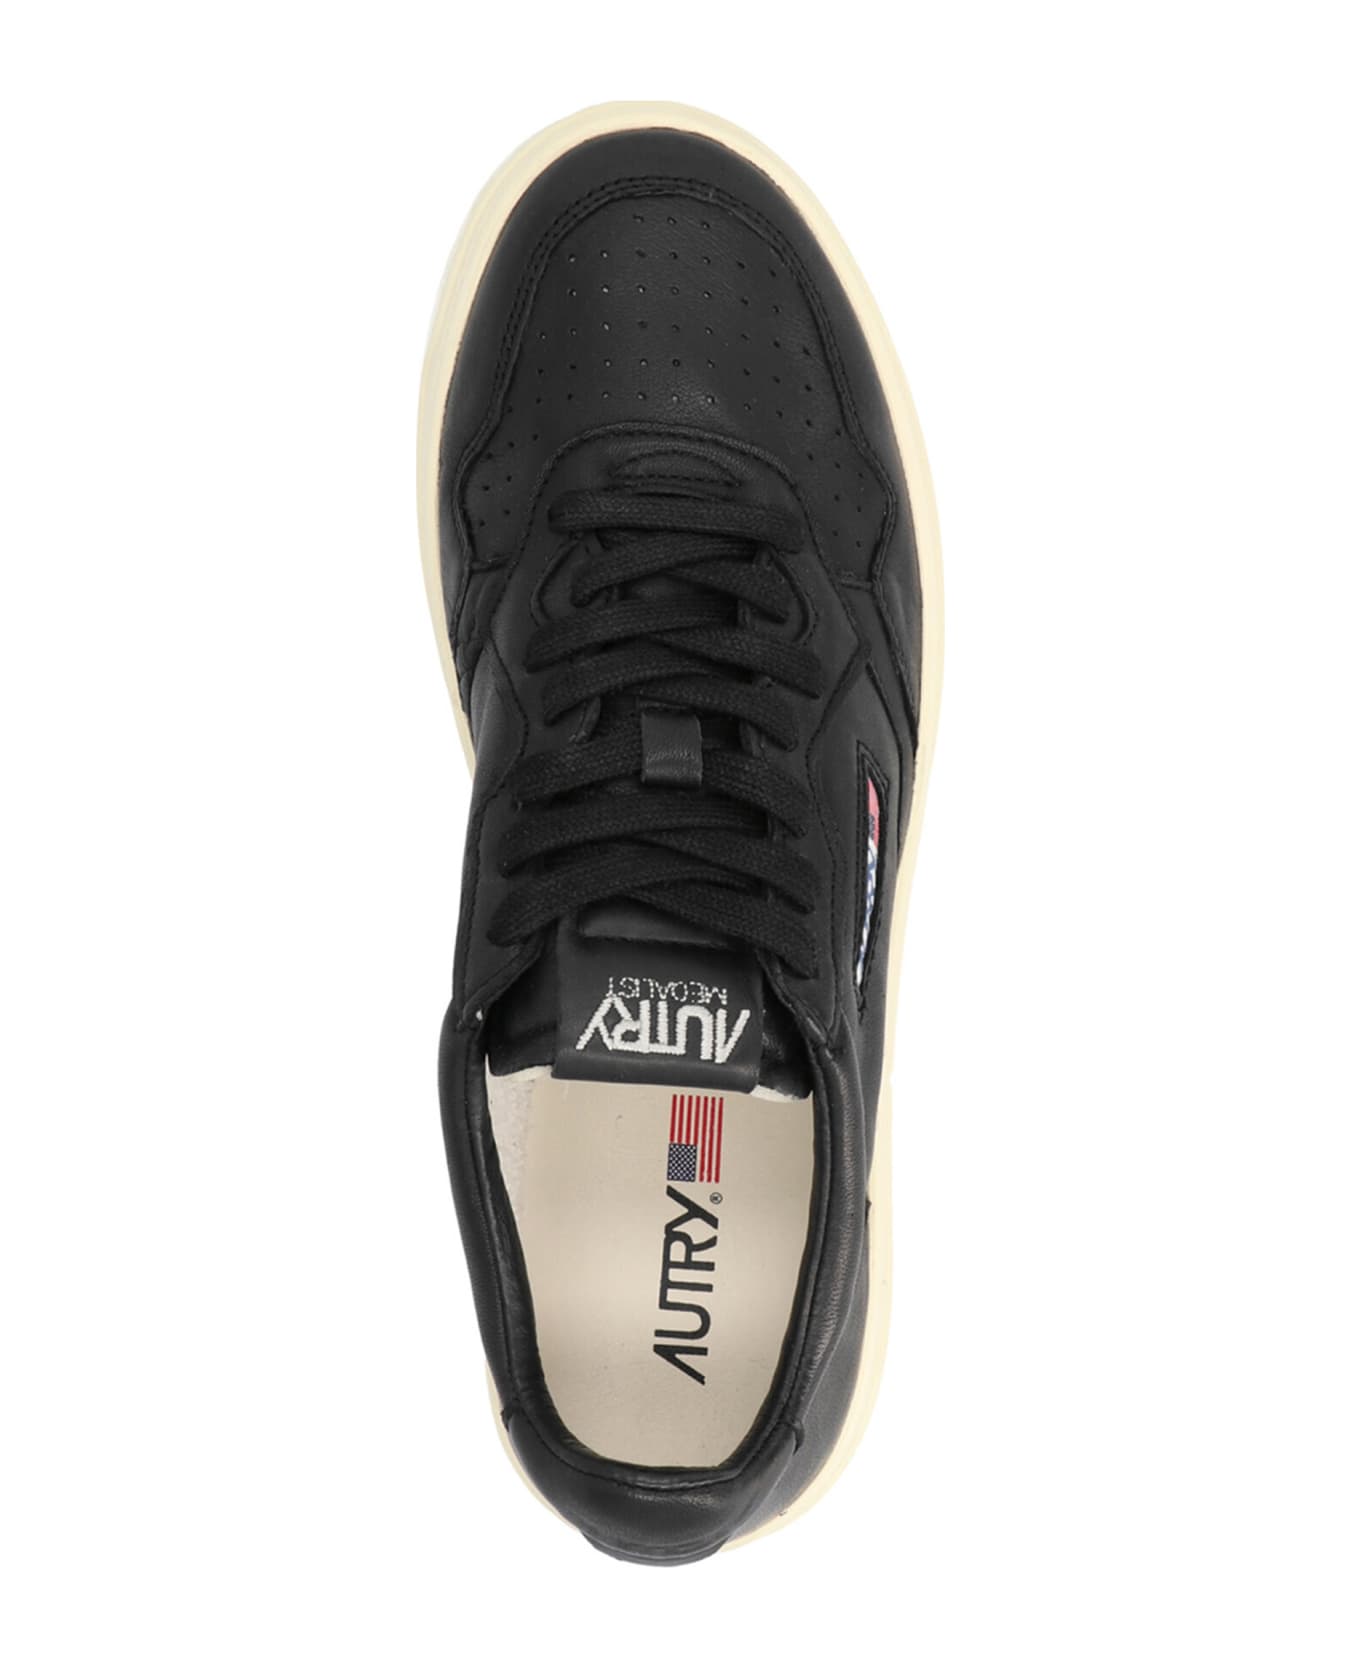 Autry Leather Sneakers - White/Black スニーカー